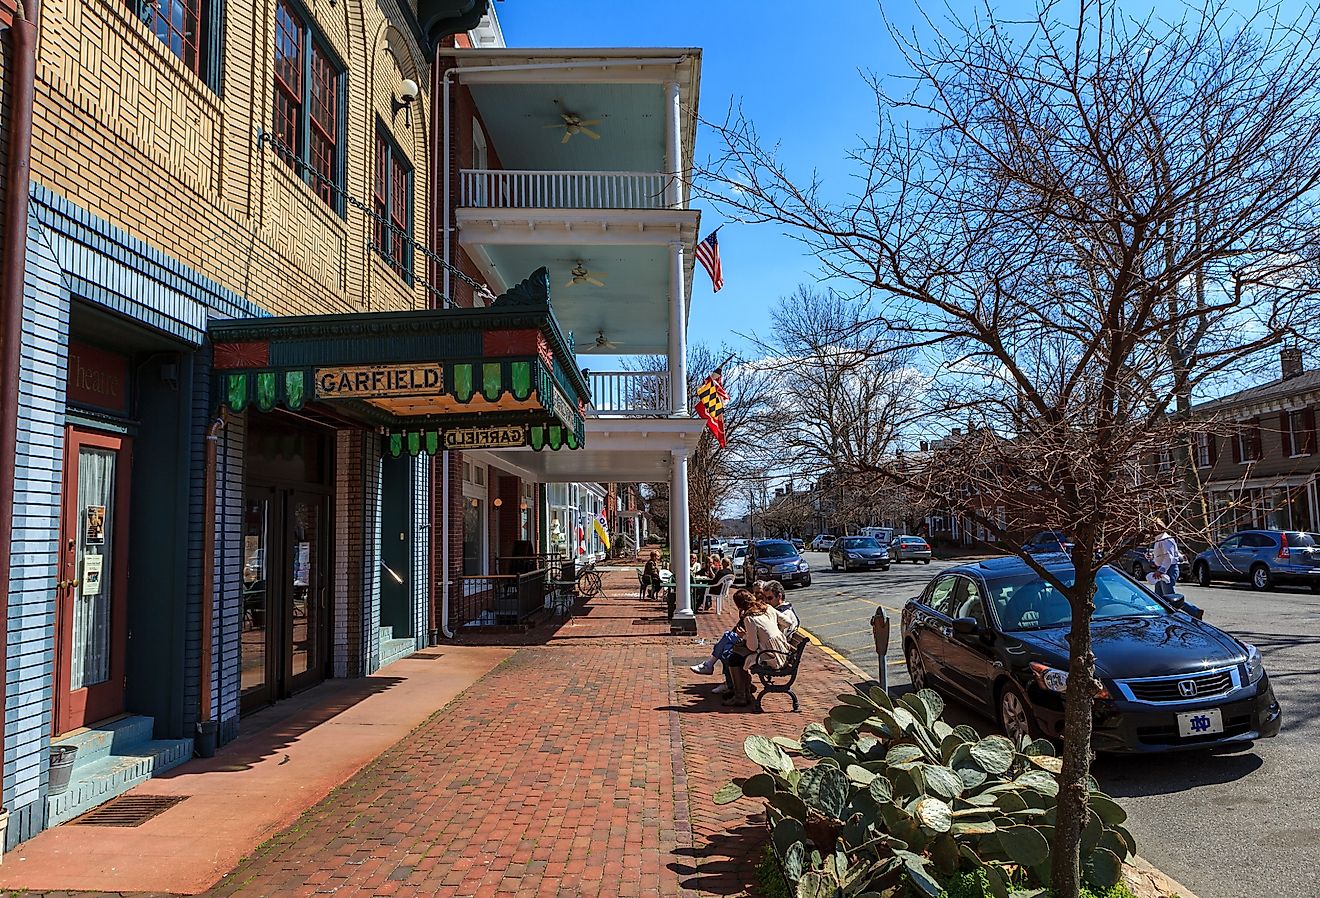 The business district in Chestertown, Maryland. Image credit George Sheldon via Shutterstock.com